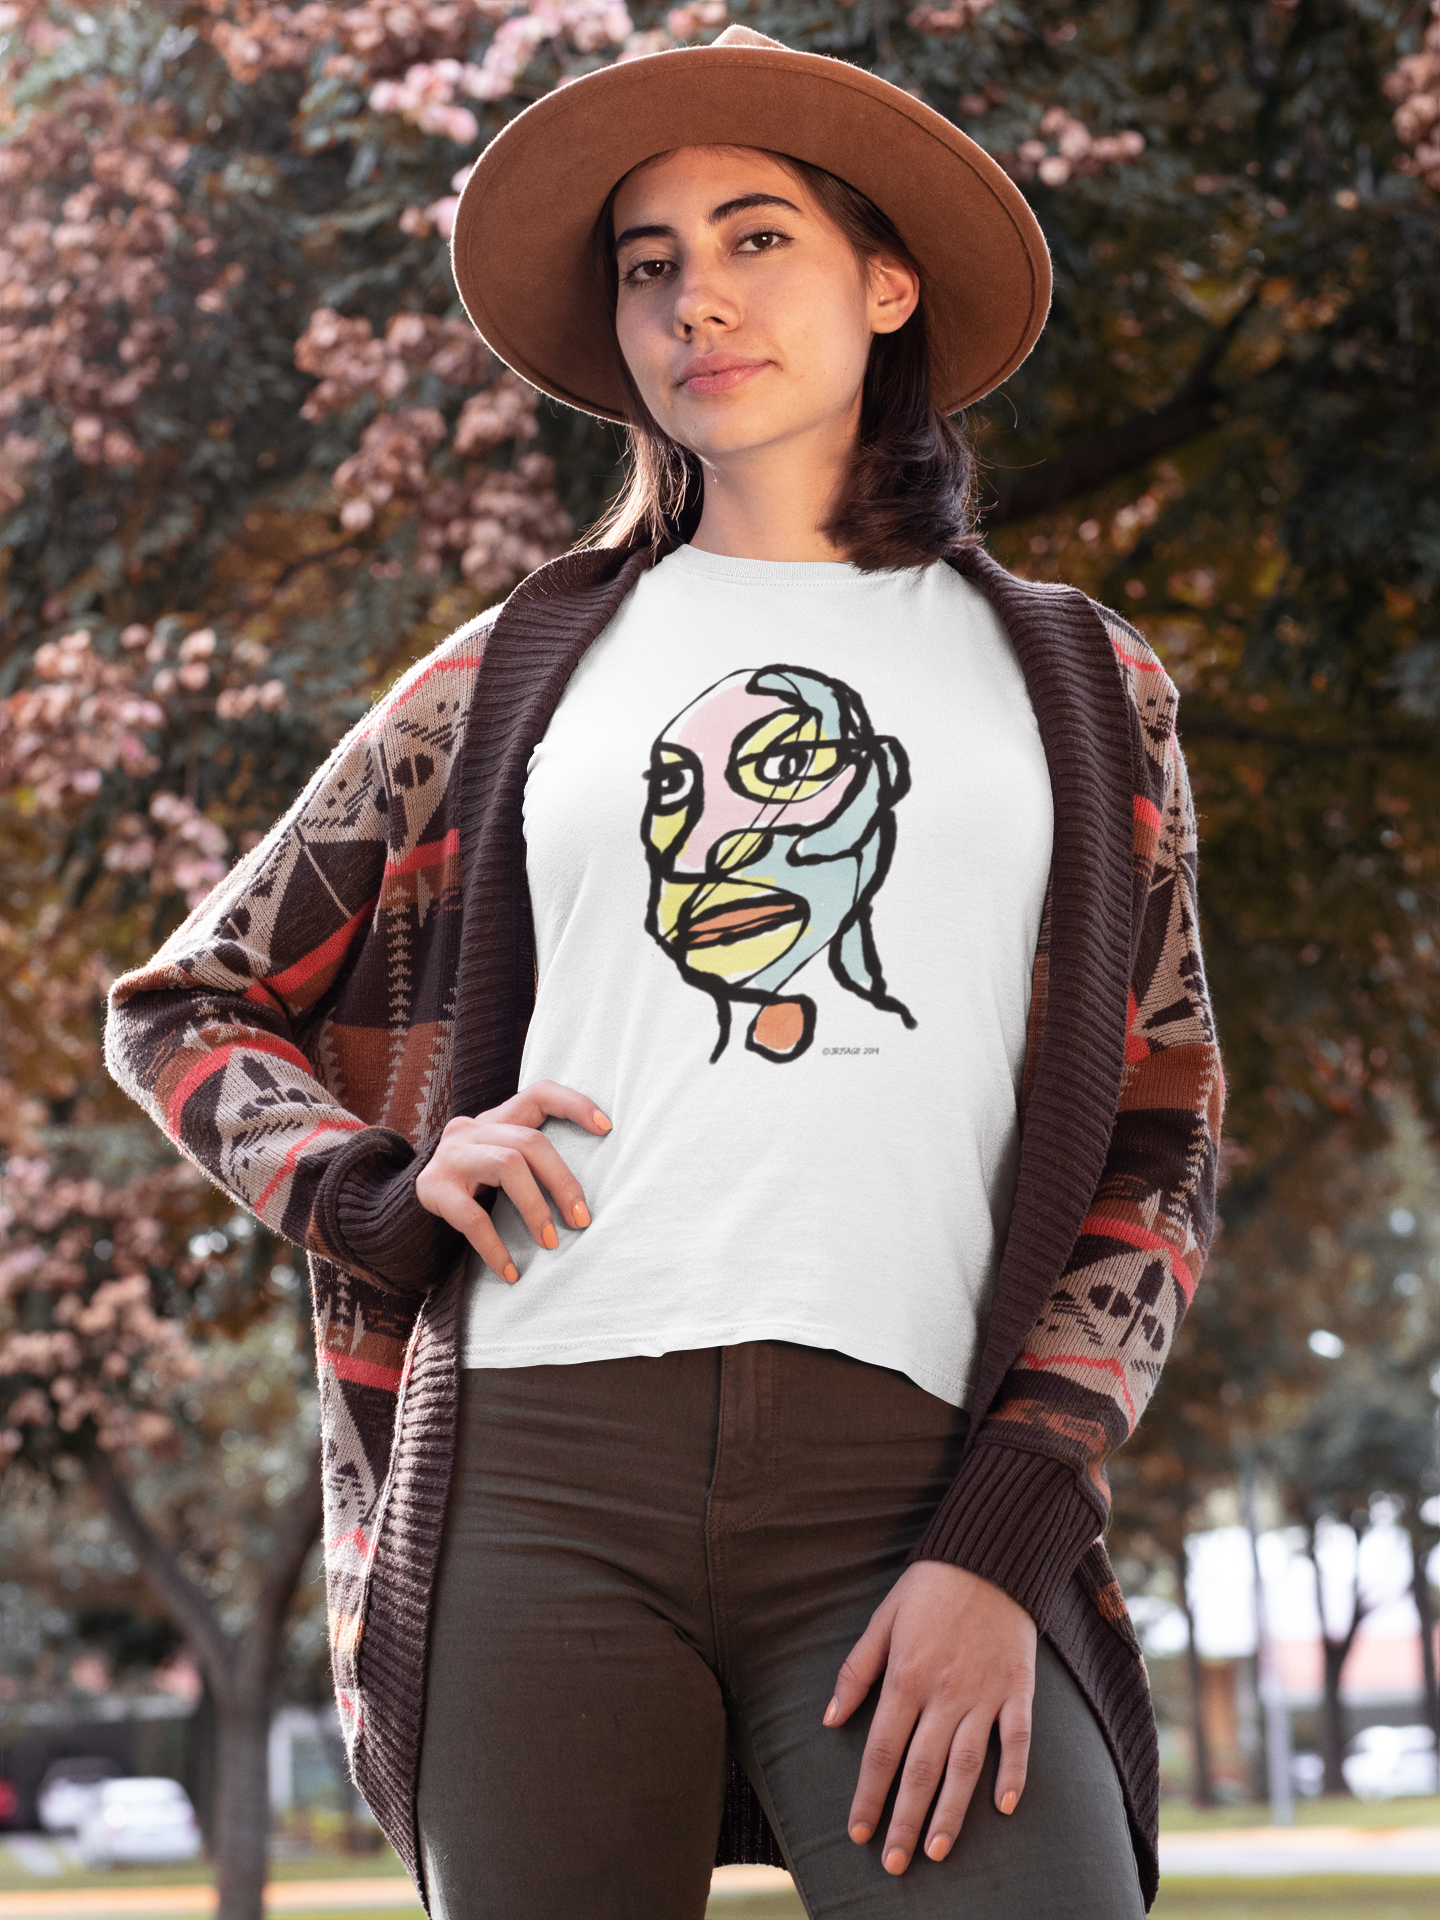 Abstract man portrait t-shirt - Young woman wearing an Edgy Eddie abstract man's face illustrated on a vegan white cotton t-shirt by Hector and Bone